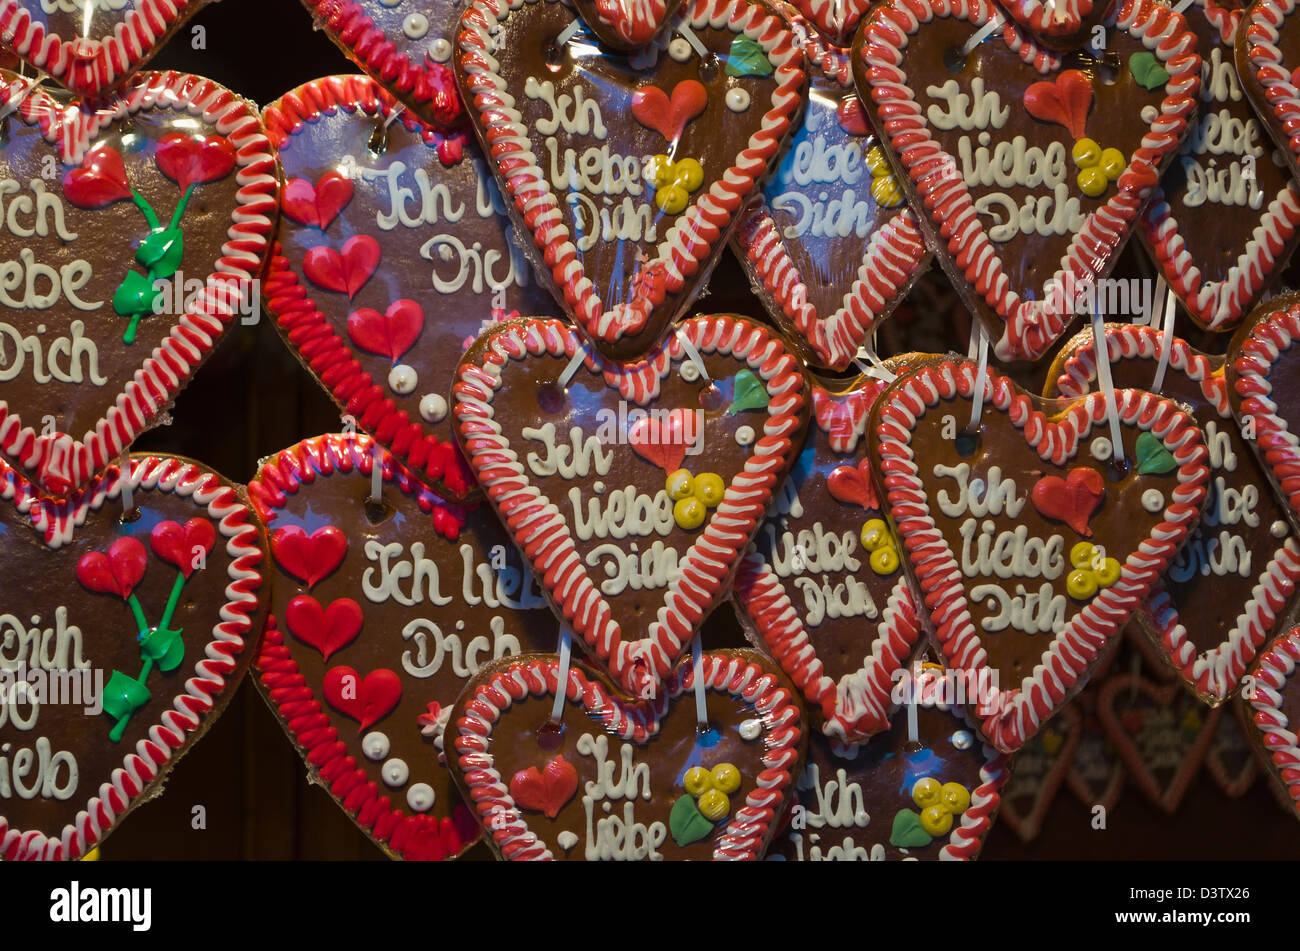 Ginger bread hearts for sale at Christmas market with inscription Ïch liebe Dich' (I love you) Stock Photo